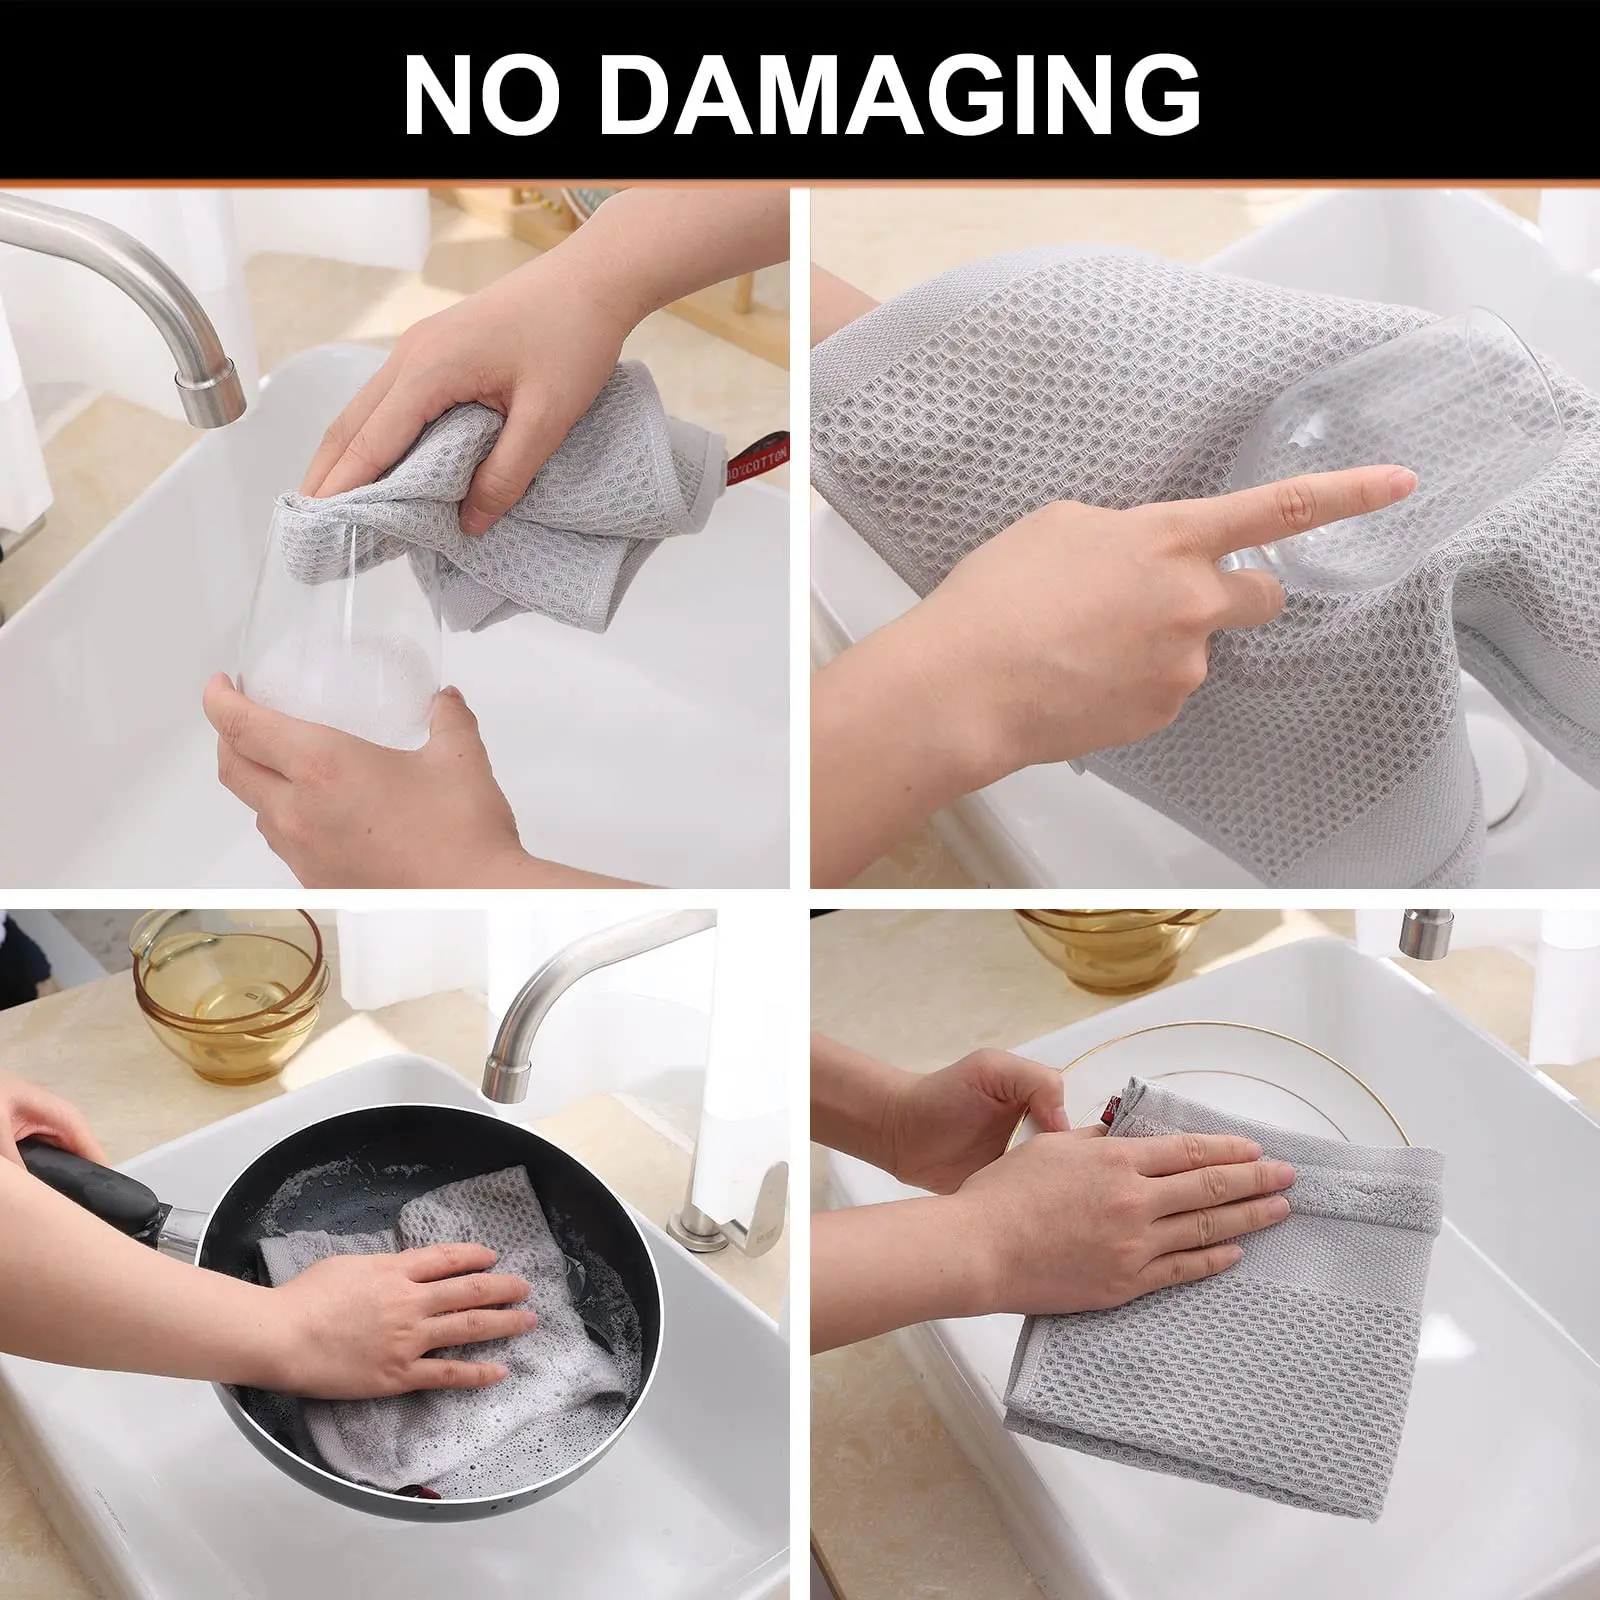 https://ae01.alicdn.com/kf/Sb7c7dcfc4fd047cbb7f98b7f7e2b62a5v/Homaxy-100-Cotton-Dishcloth-Waffle-Weave-Hand-Towel-Soft-Absorbent-Kitchen-Dish-Cleaning-Cloth-Quick-Drying.jpg